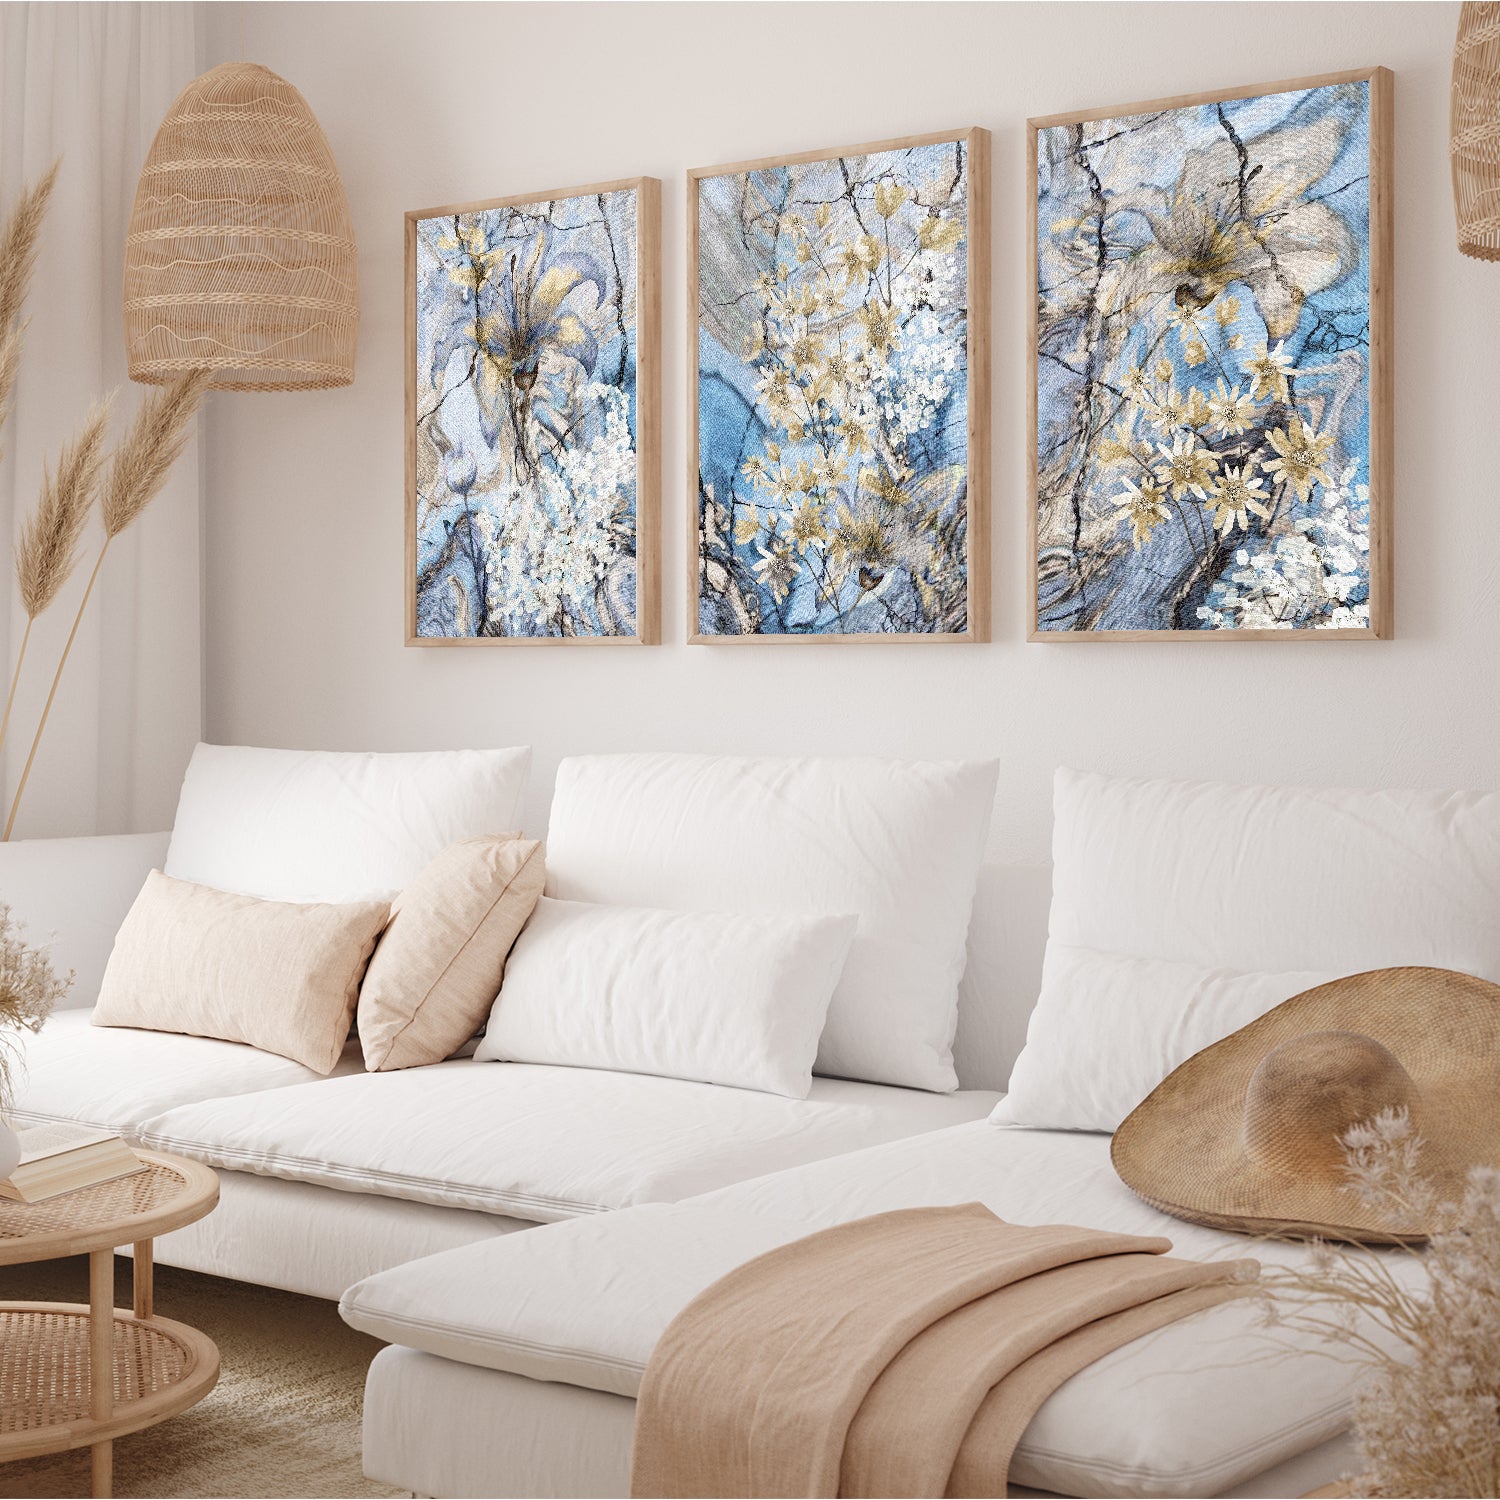 A floral symphony in three canvas.